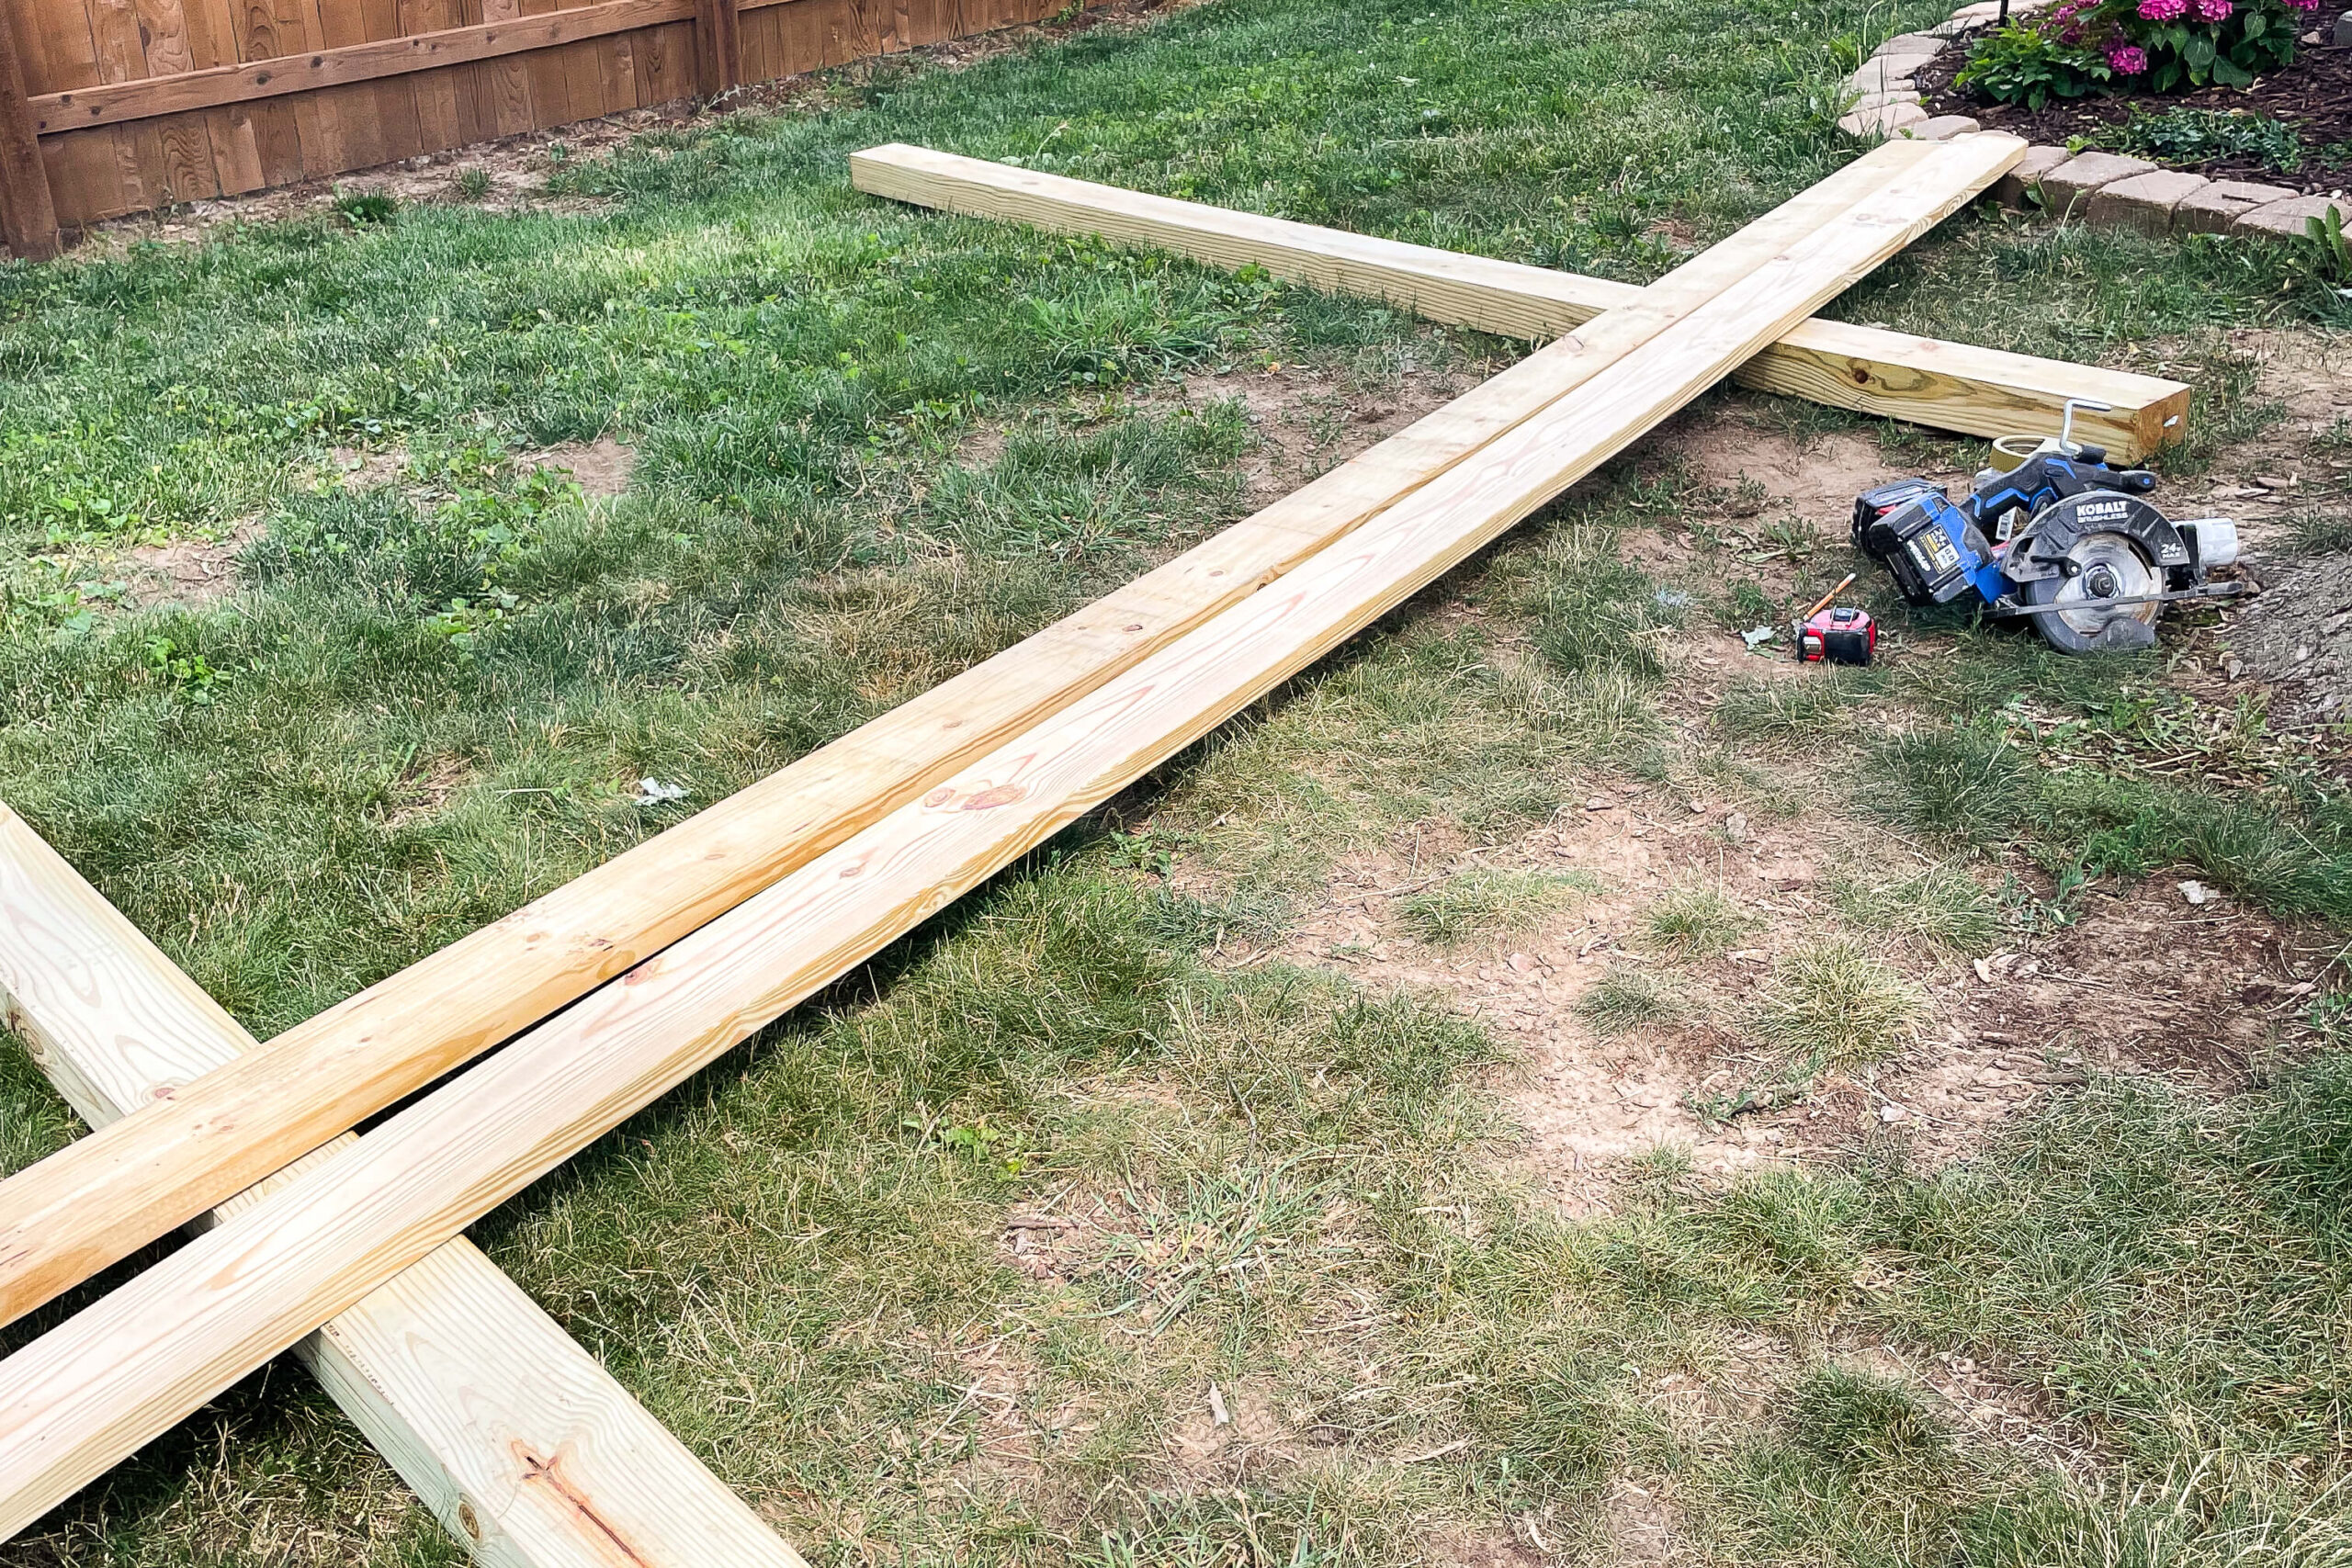 Basic supplies needed for building a backyard hammock stand.